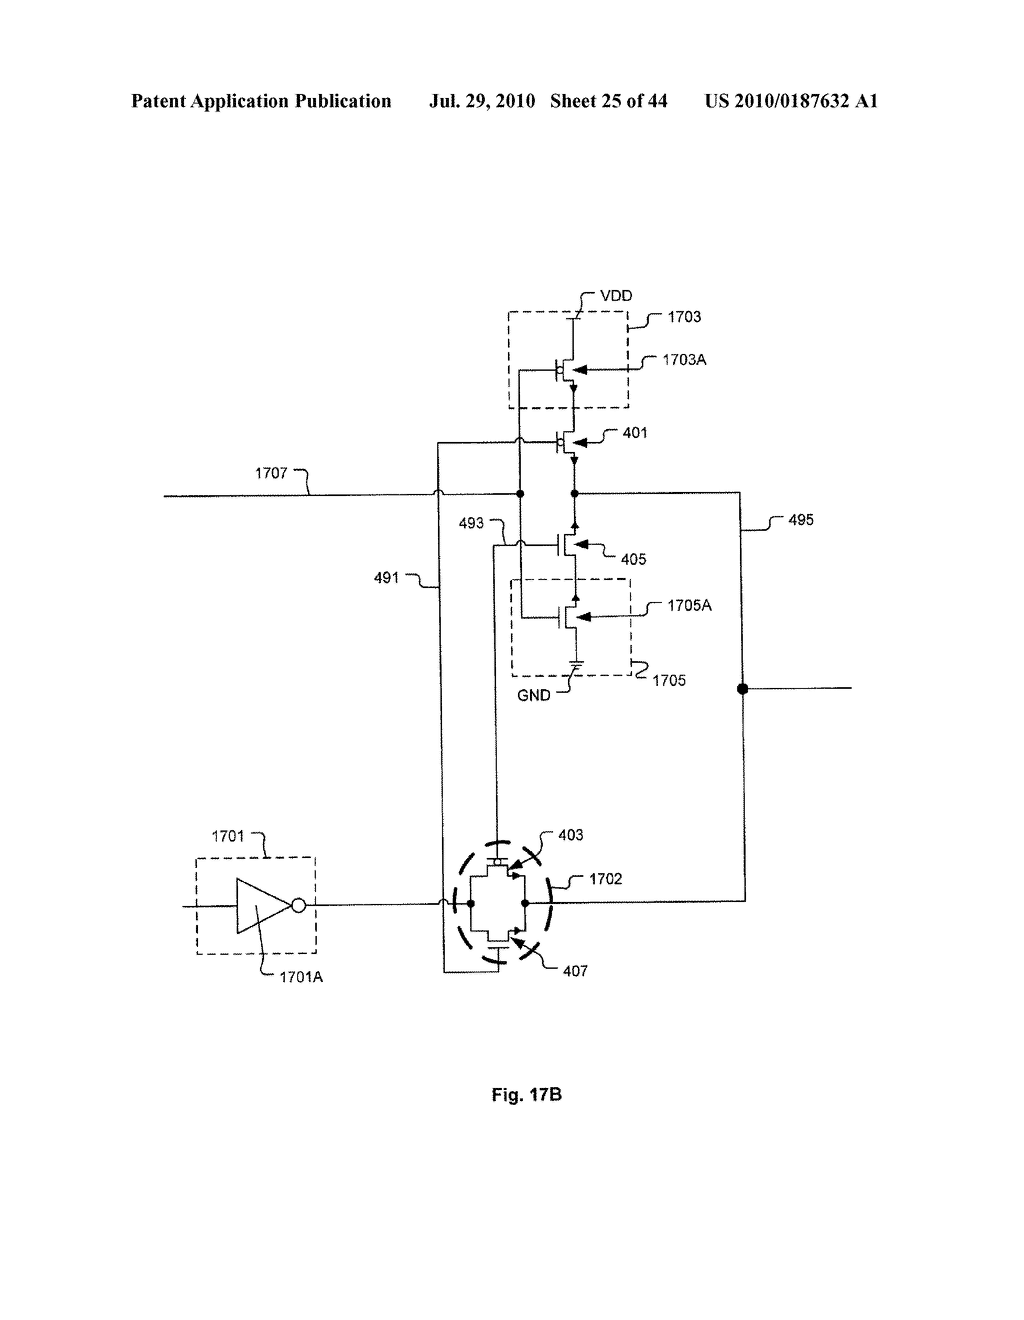 Channelized Gate Level Cross-Coupled Transistor Device with Complimentary Pairs of Cross-Coupled Transistors Defined by Physically Separate Gate Electrodes within Gate Electrode Level - diagram, schematic, and image 26